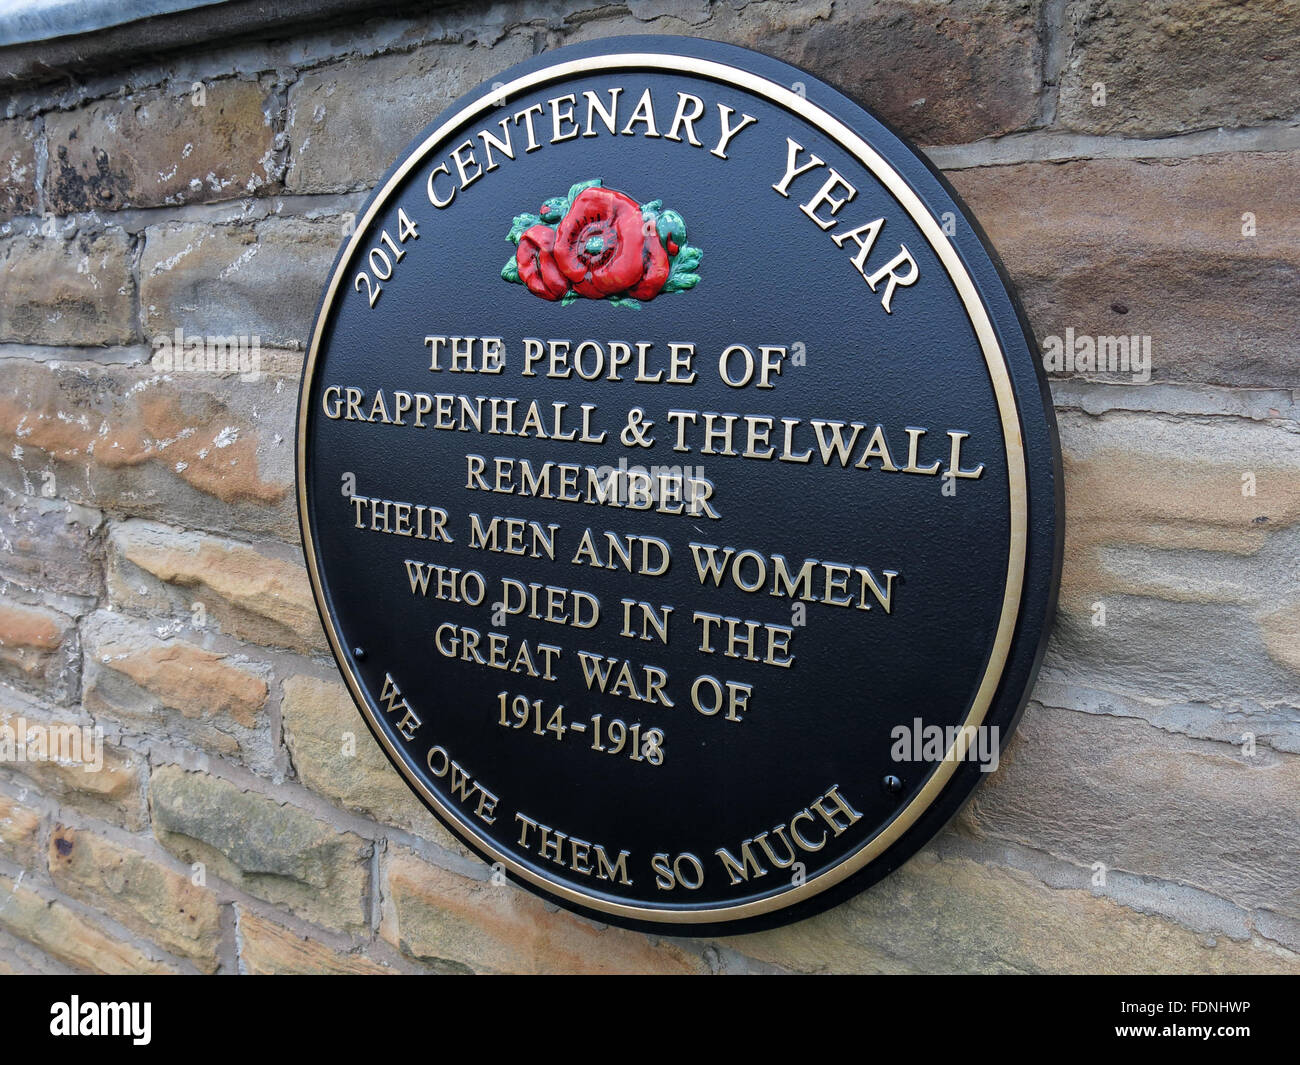 2014 Centenary Year Plaque, Grappenhall & Thelwall - Great War 1914-1918, Cheshire, England, UK - Methodist Church Stock Photo